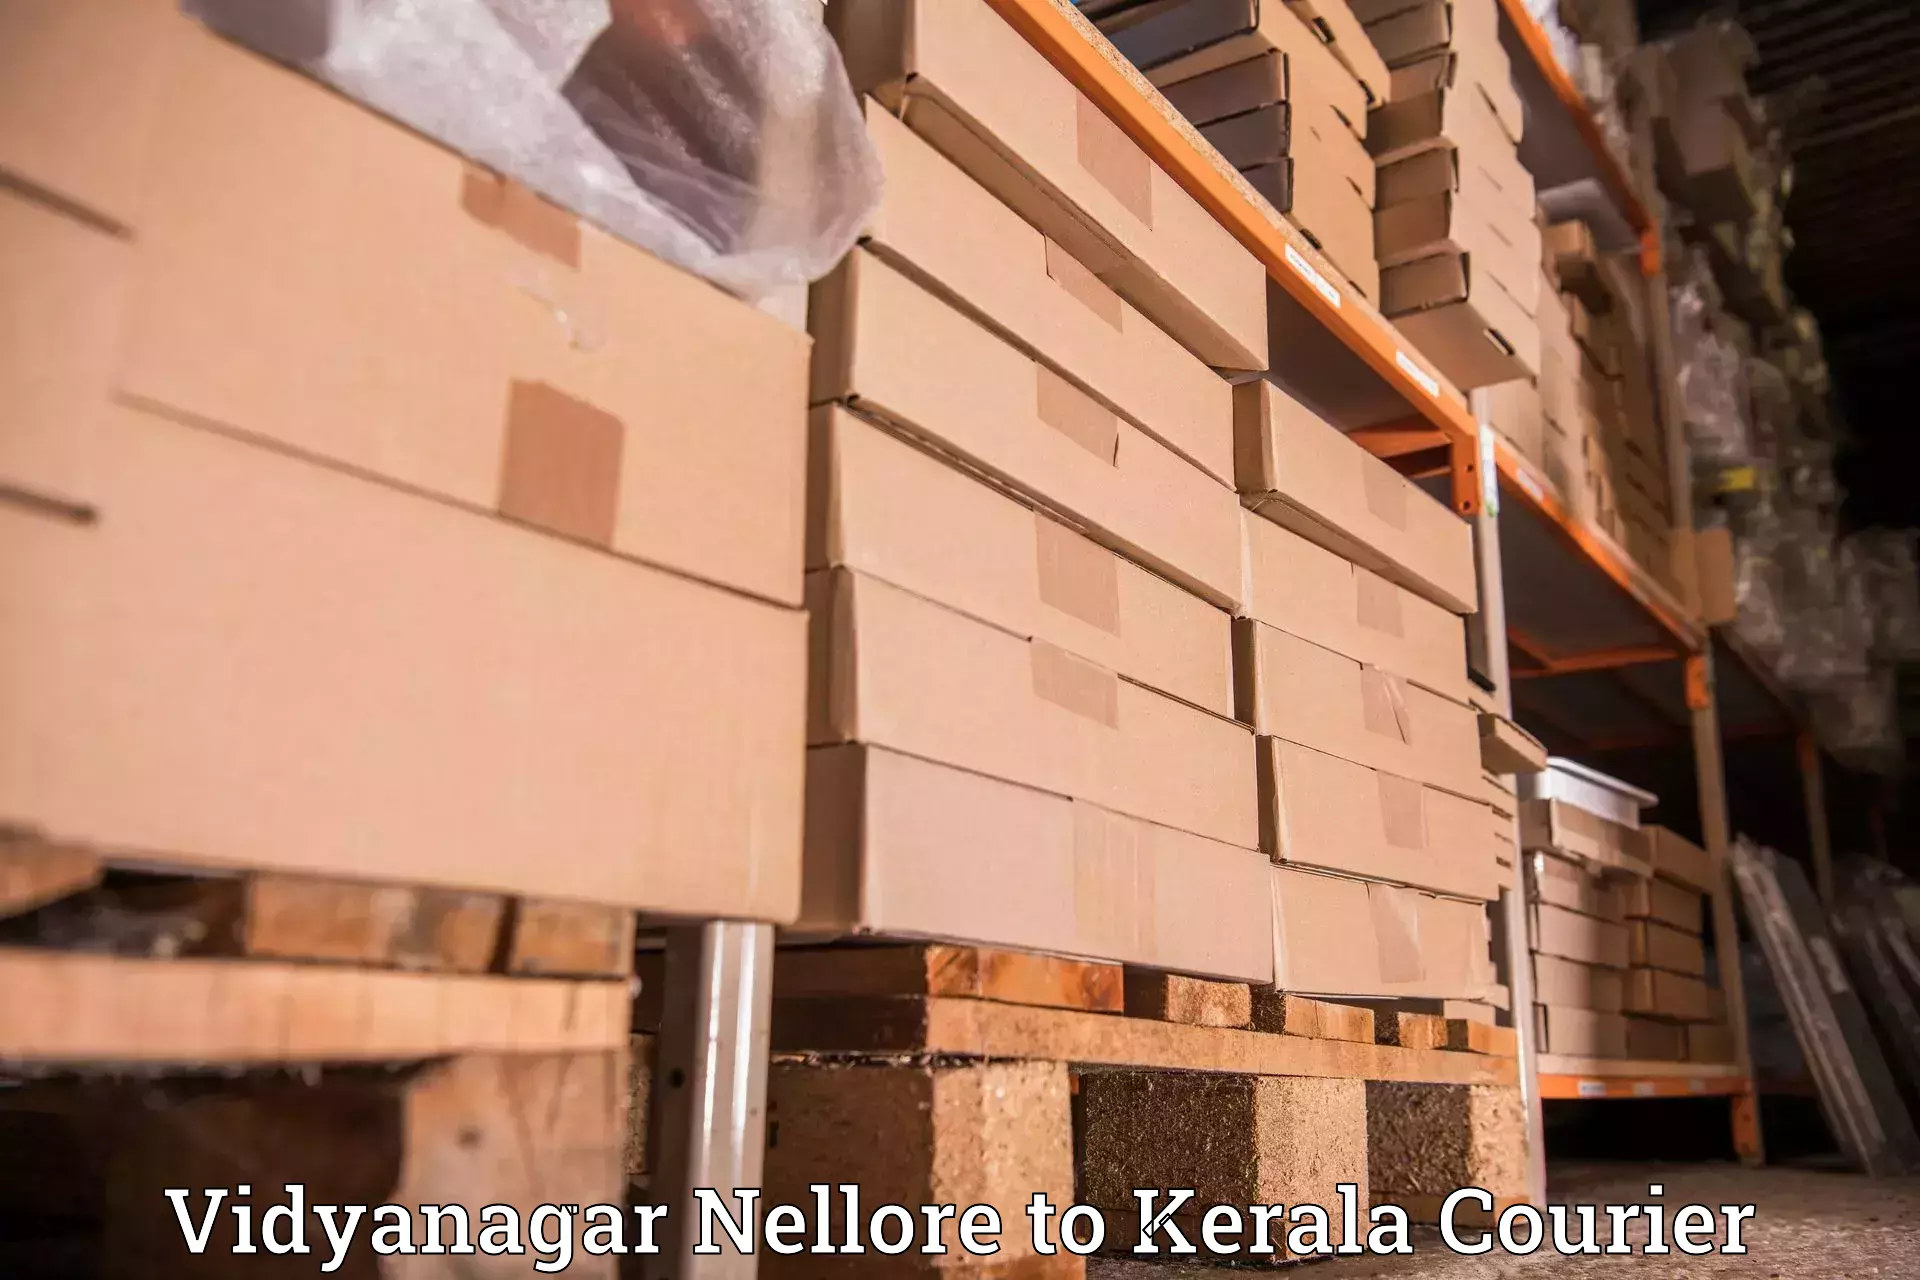 Package delivery network Vidyanagar Nellore to Cherthala